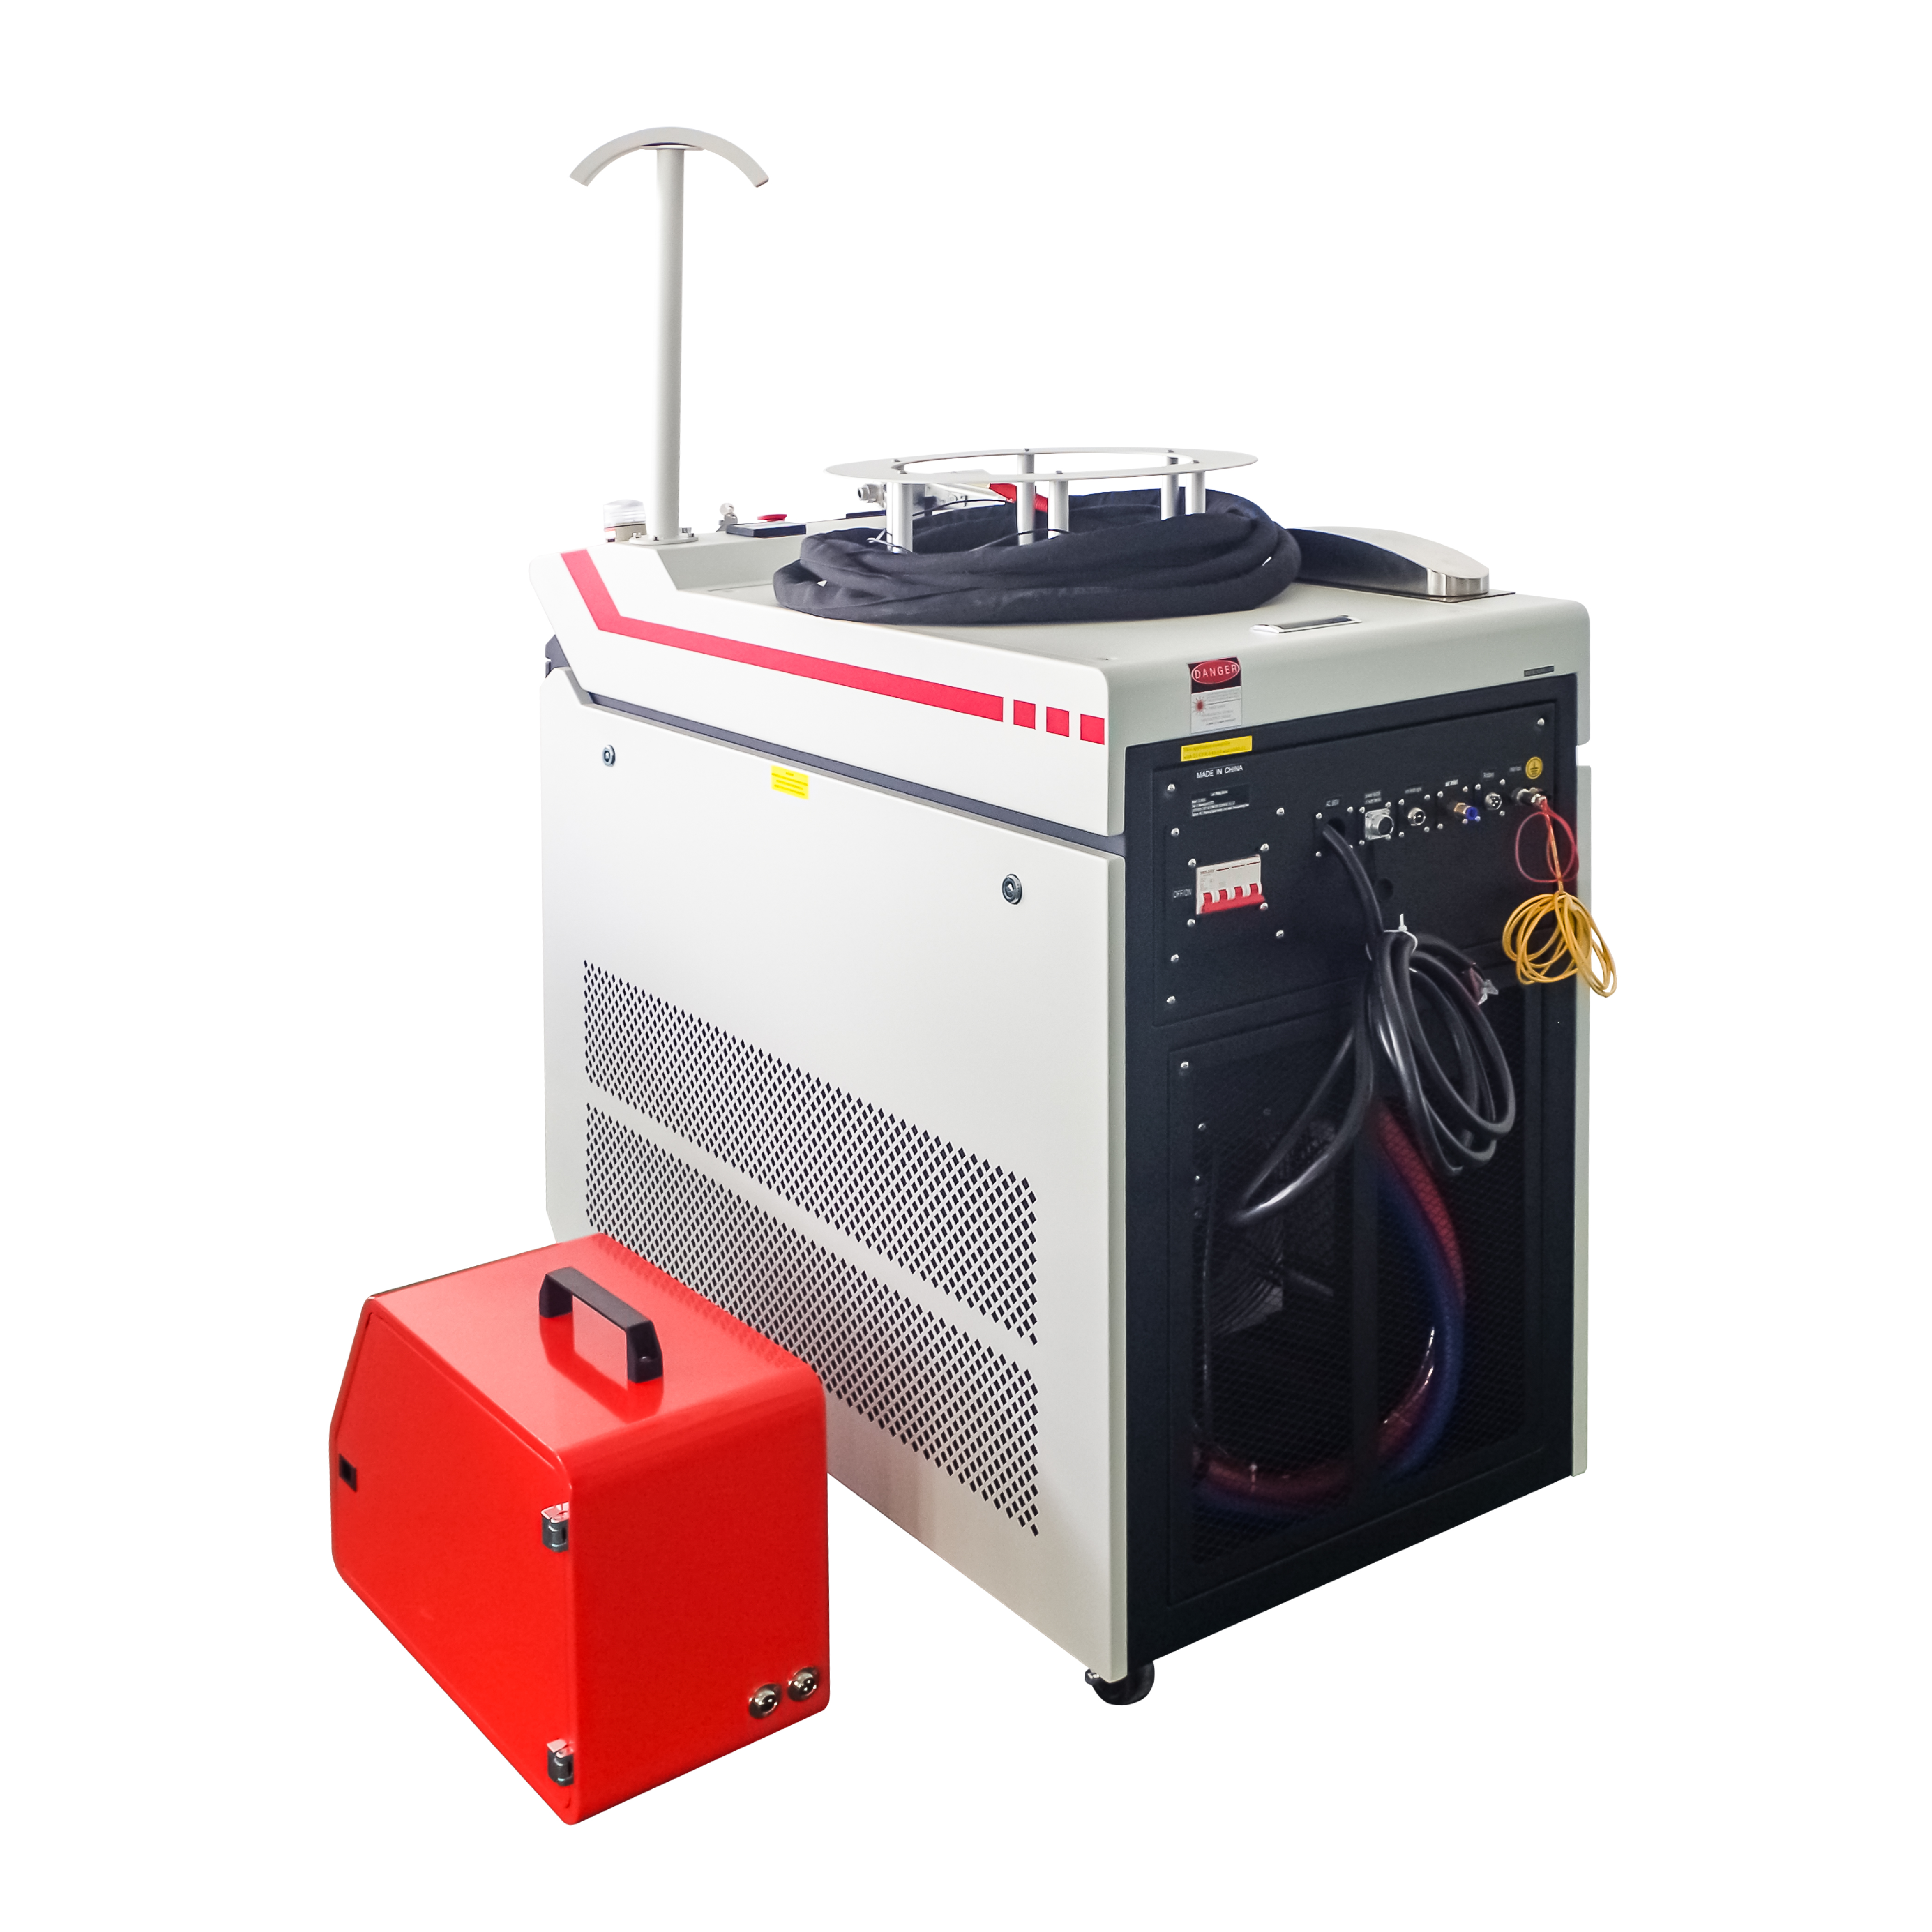 How does a laser welding machine work and what are its applications?